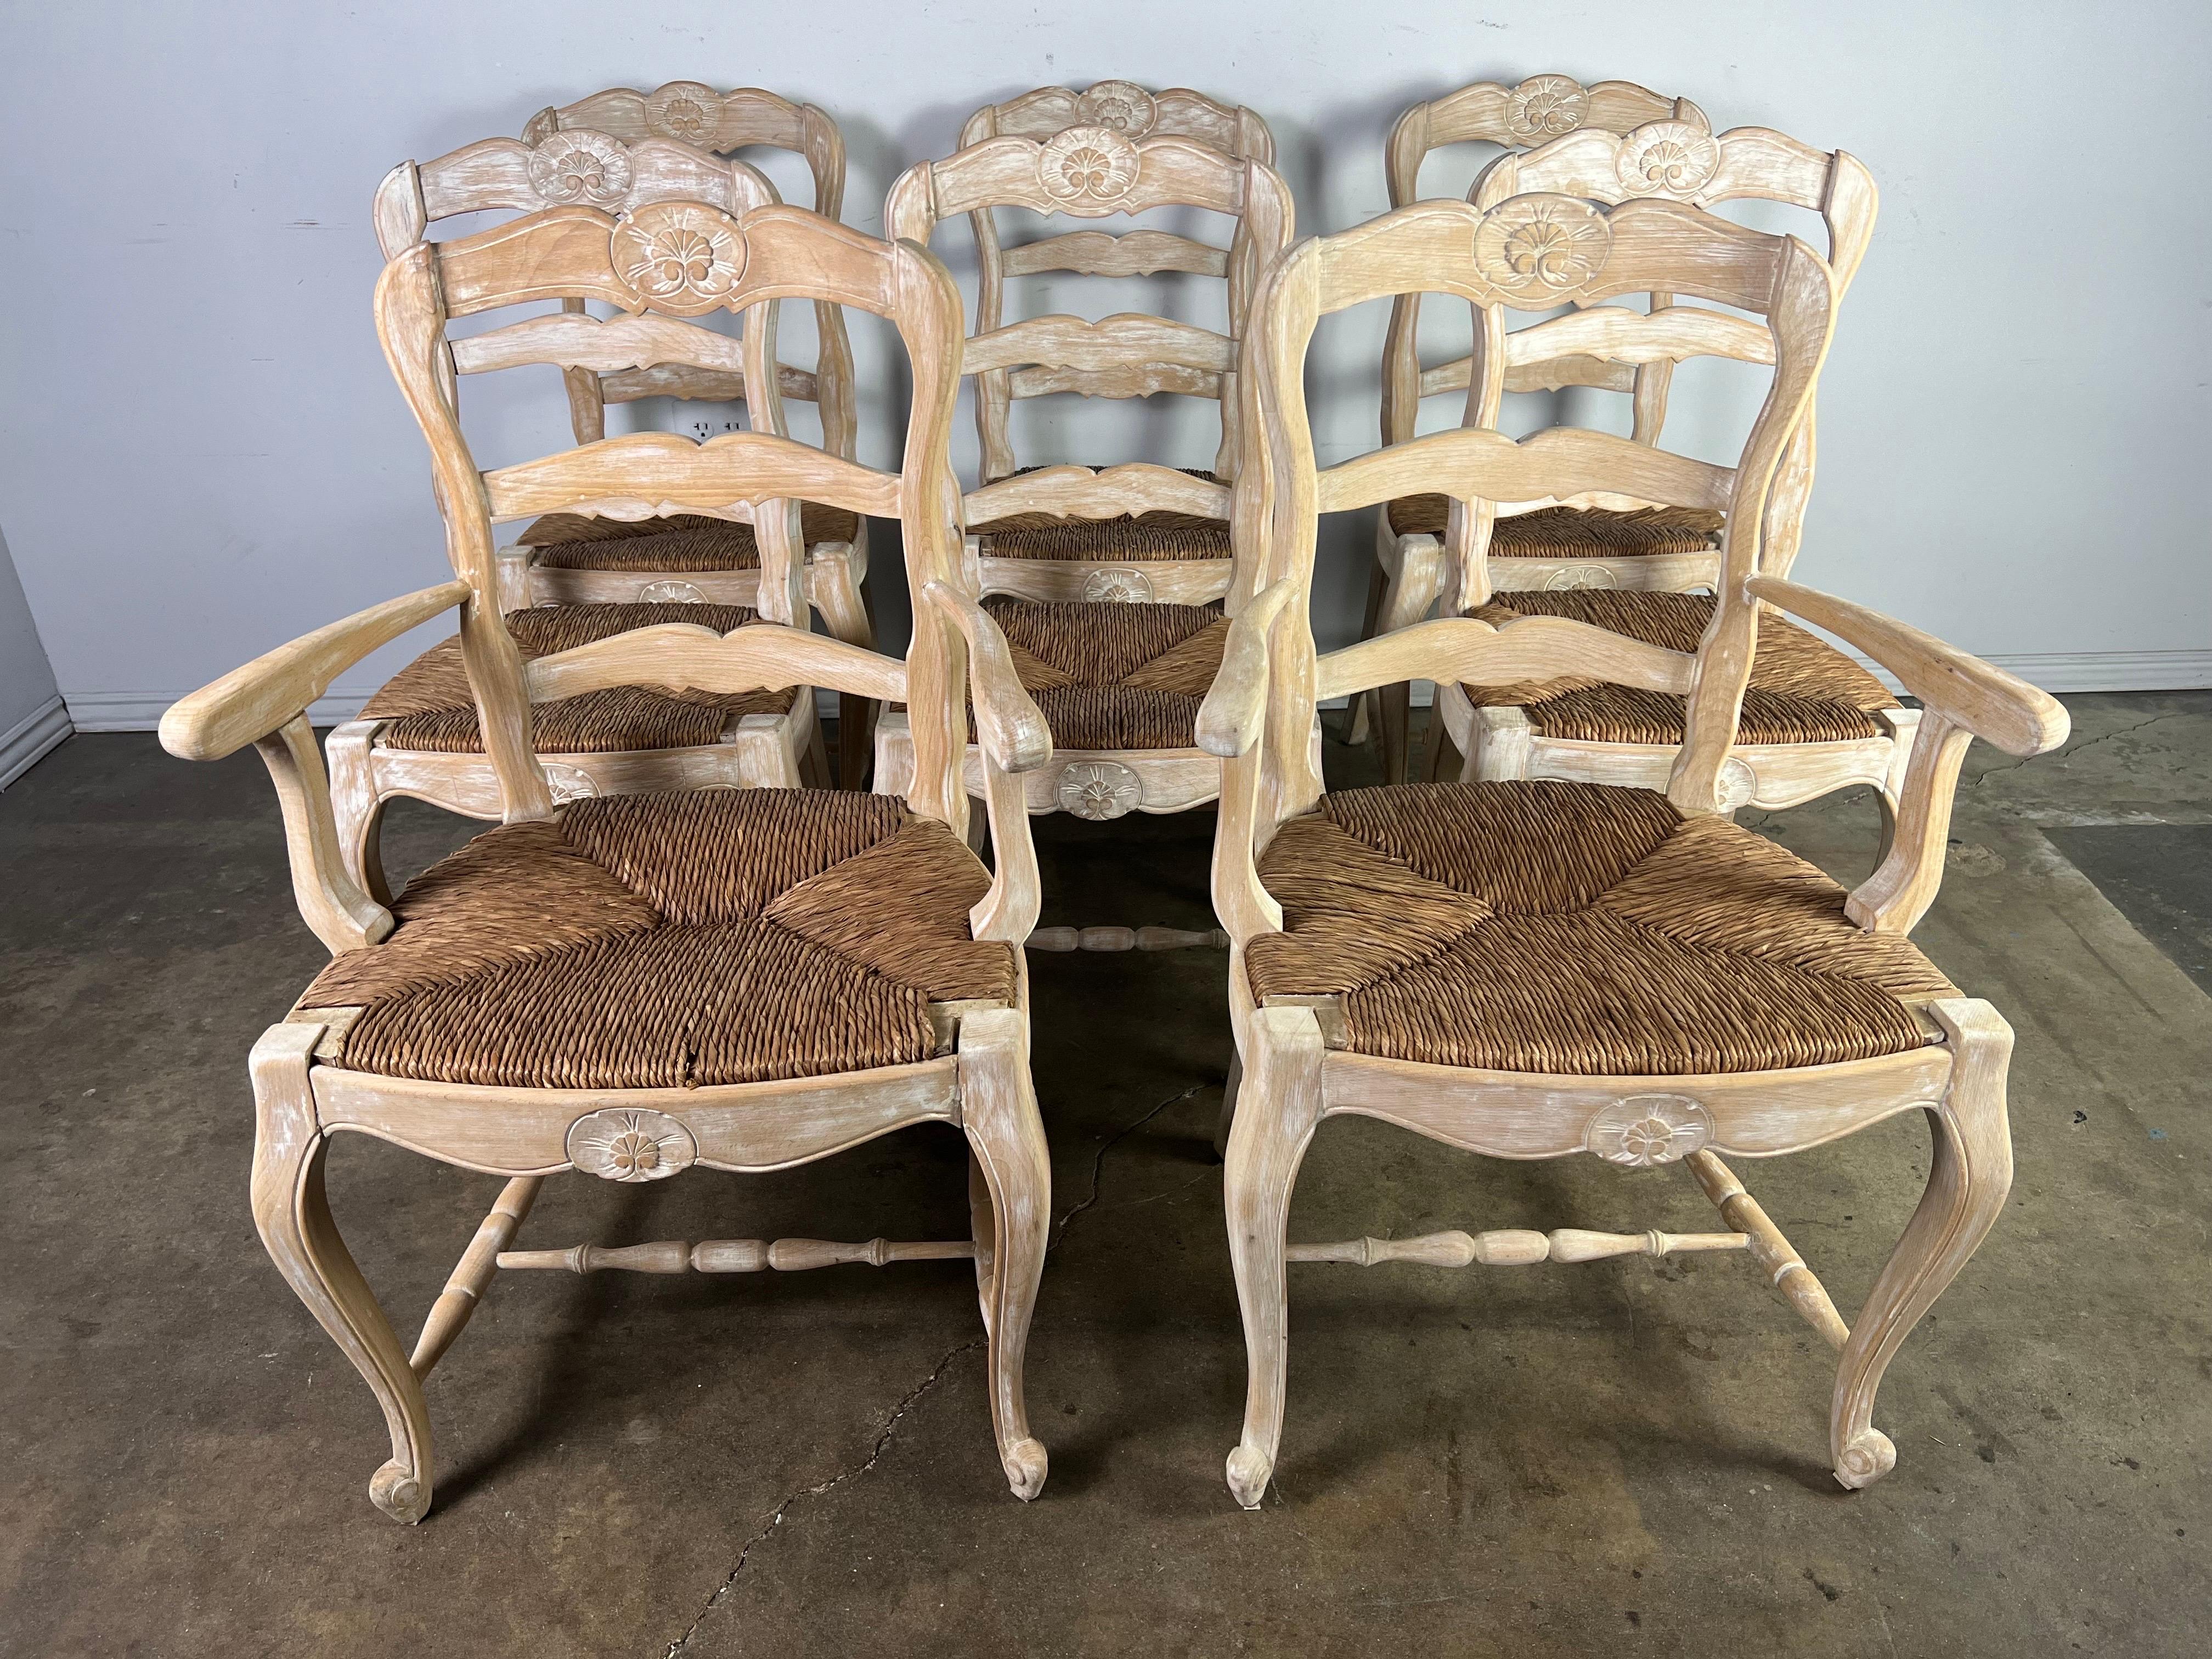 Set of eight French dining chairs w/ rush seats. The ladder back chairs stand on four cabriole legs that end in a rams head foot. The chairs have been stripped to their natural walnut finish. Original rush seats still in great condition.